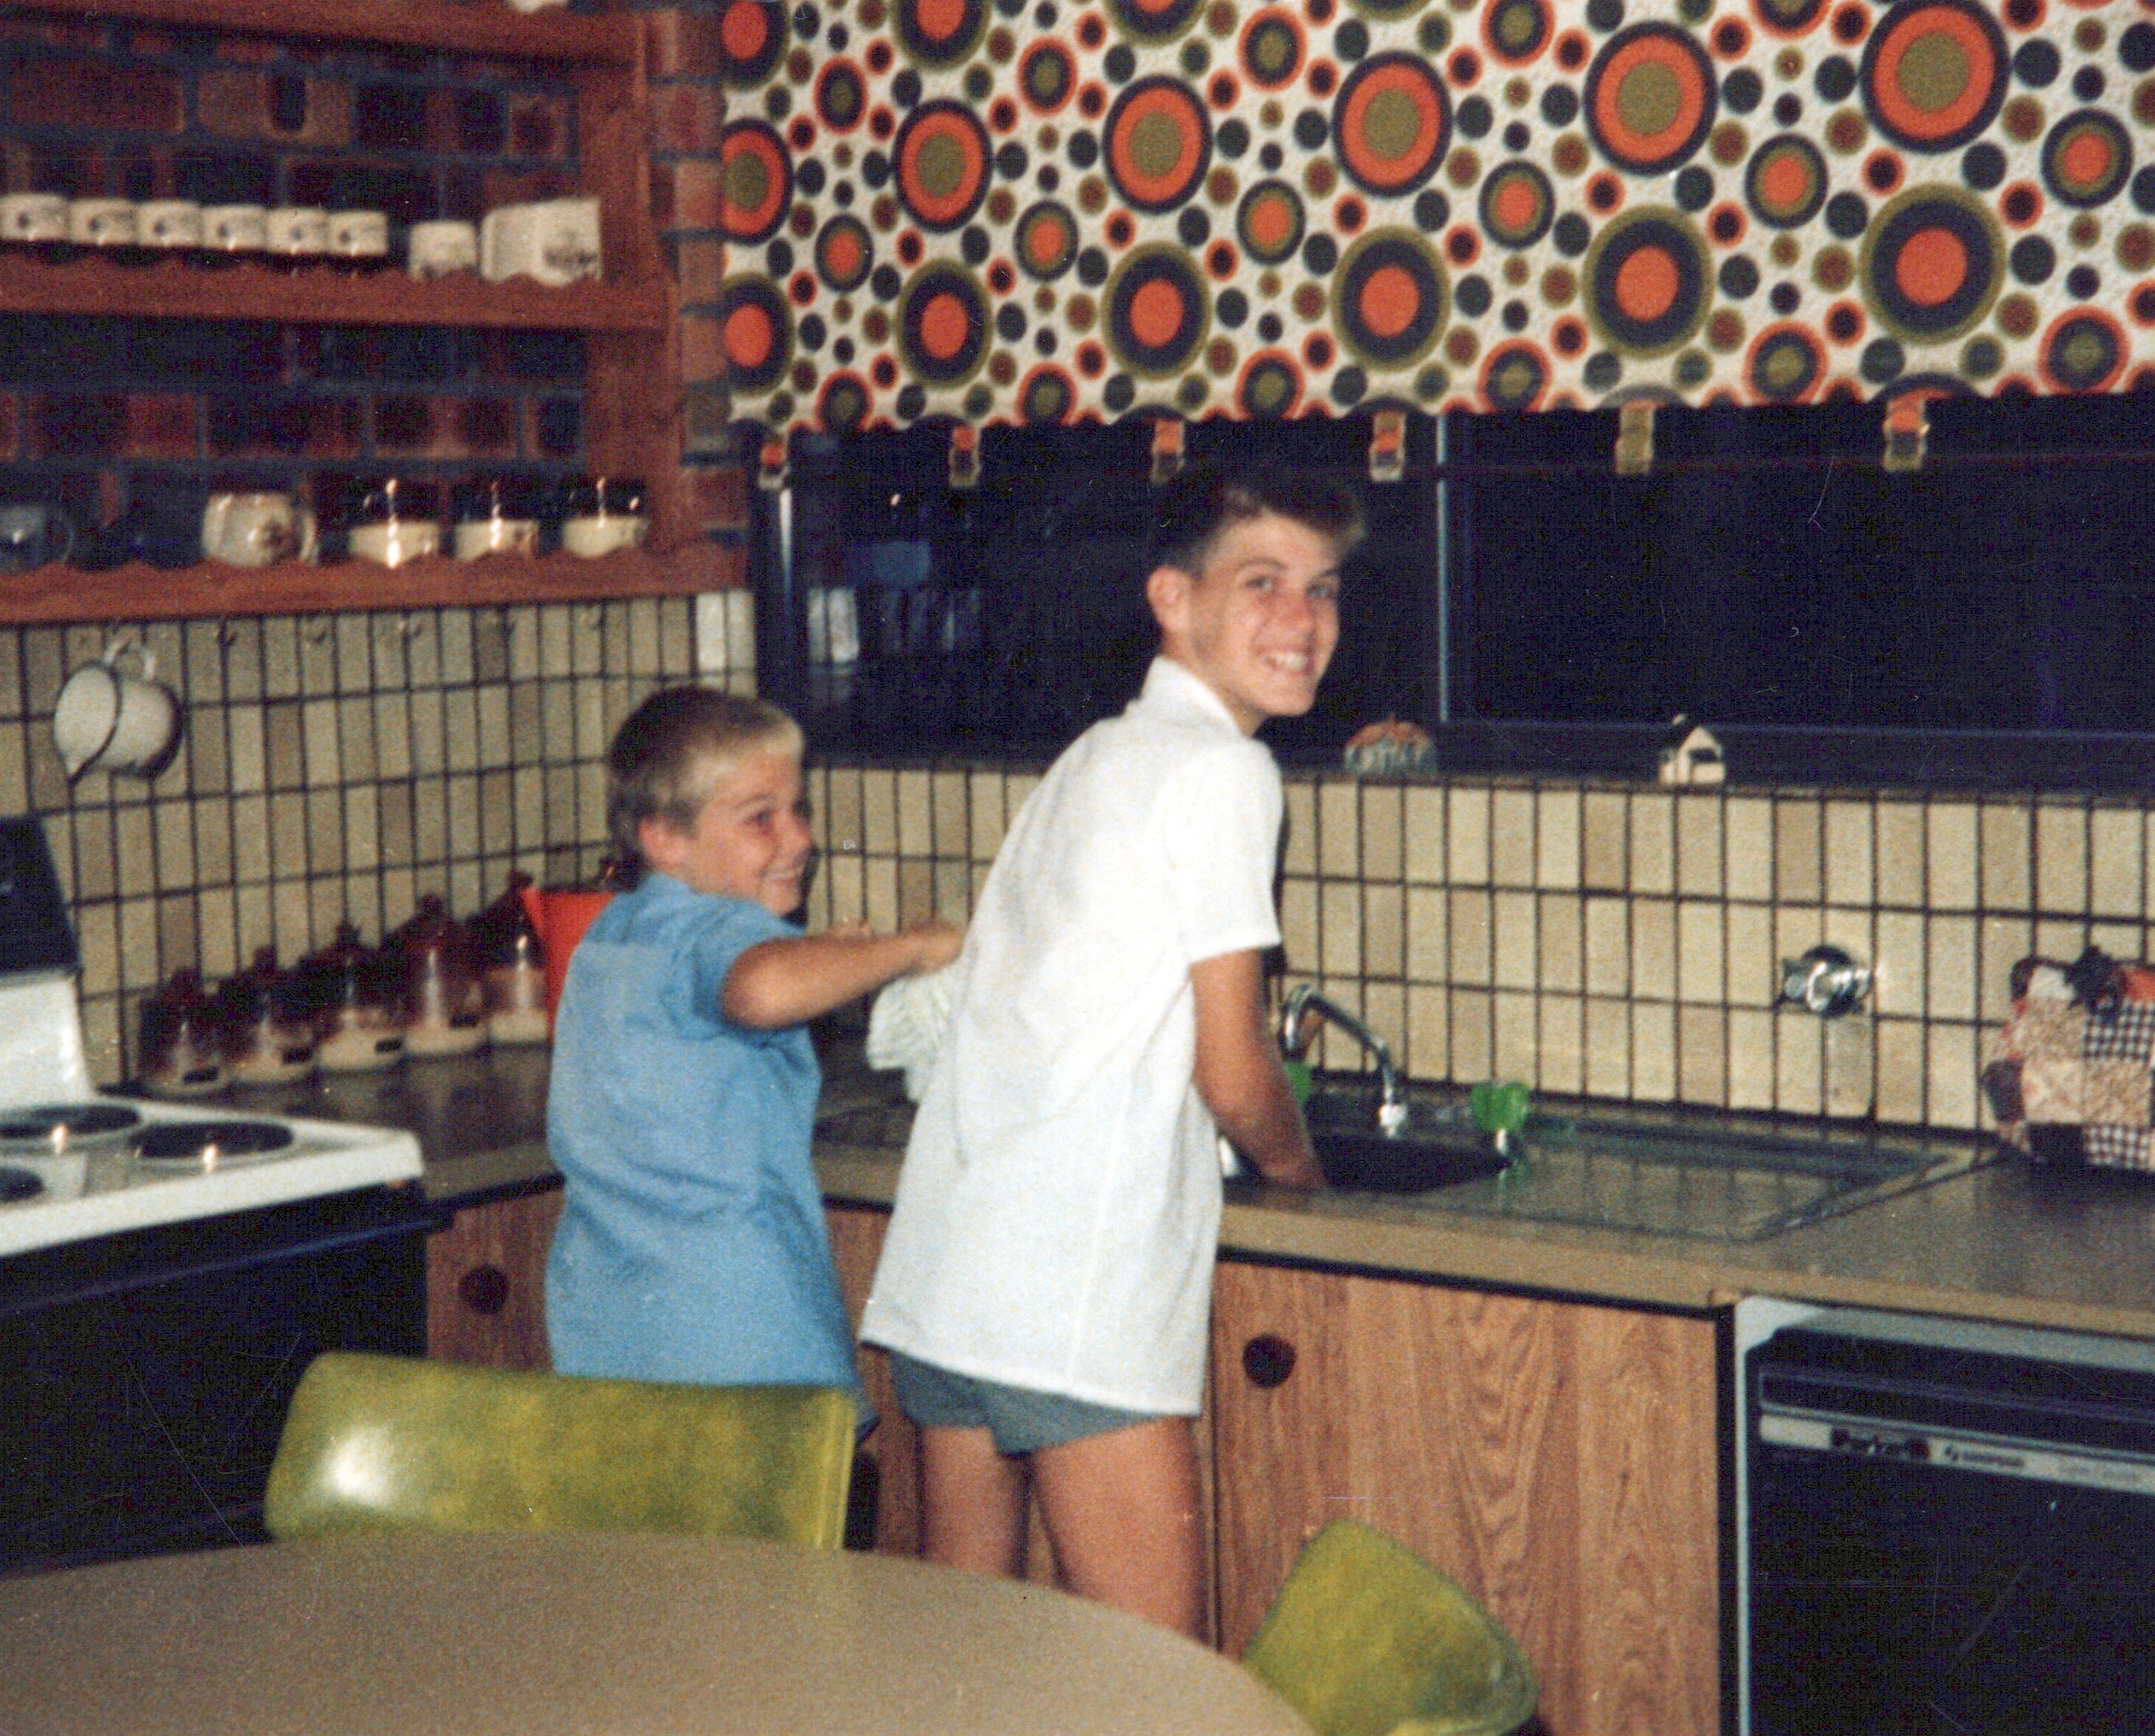 Mark & Karl - Taken November, 1986. Pretending to "wash up" but the dishwasher next to them gives them away!